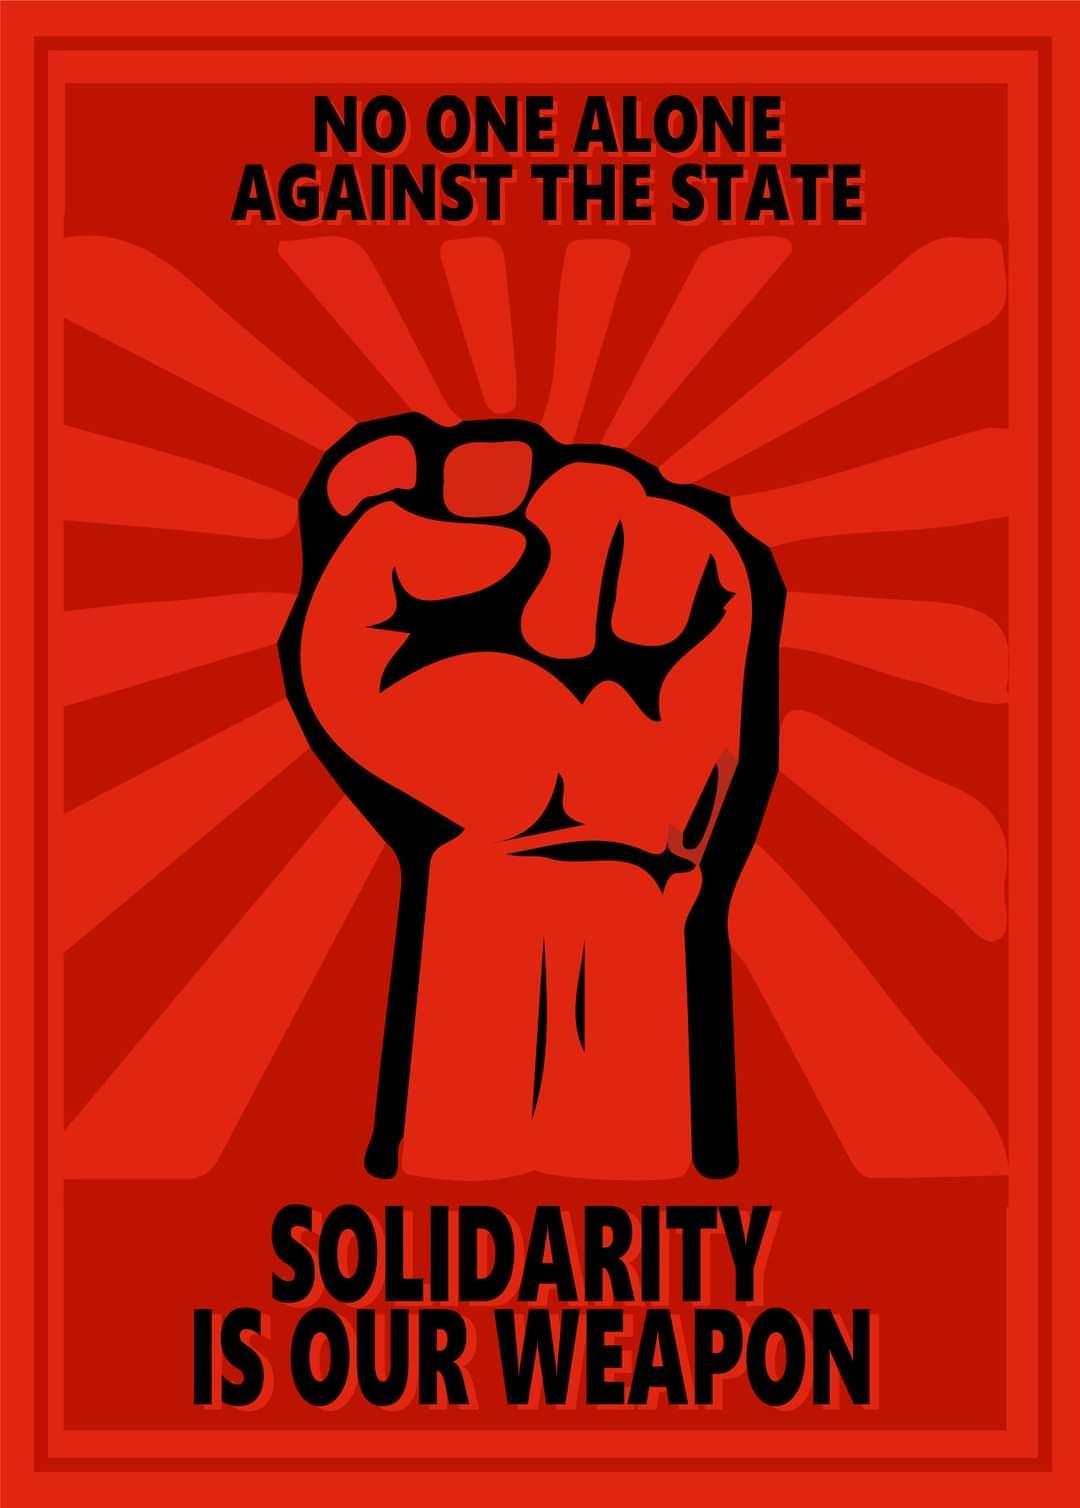 Anarchist Collective Masovka: Call for solidarity for financial assistance.